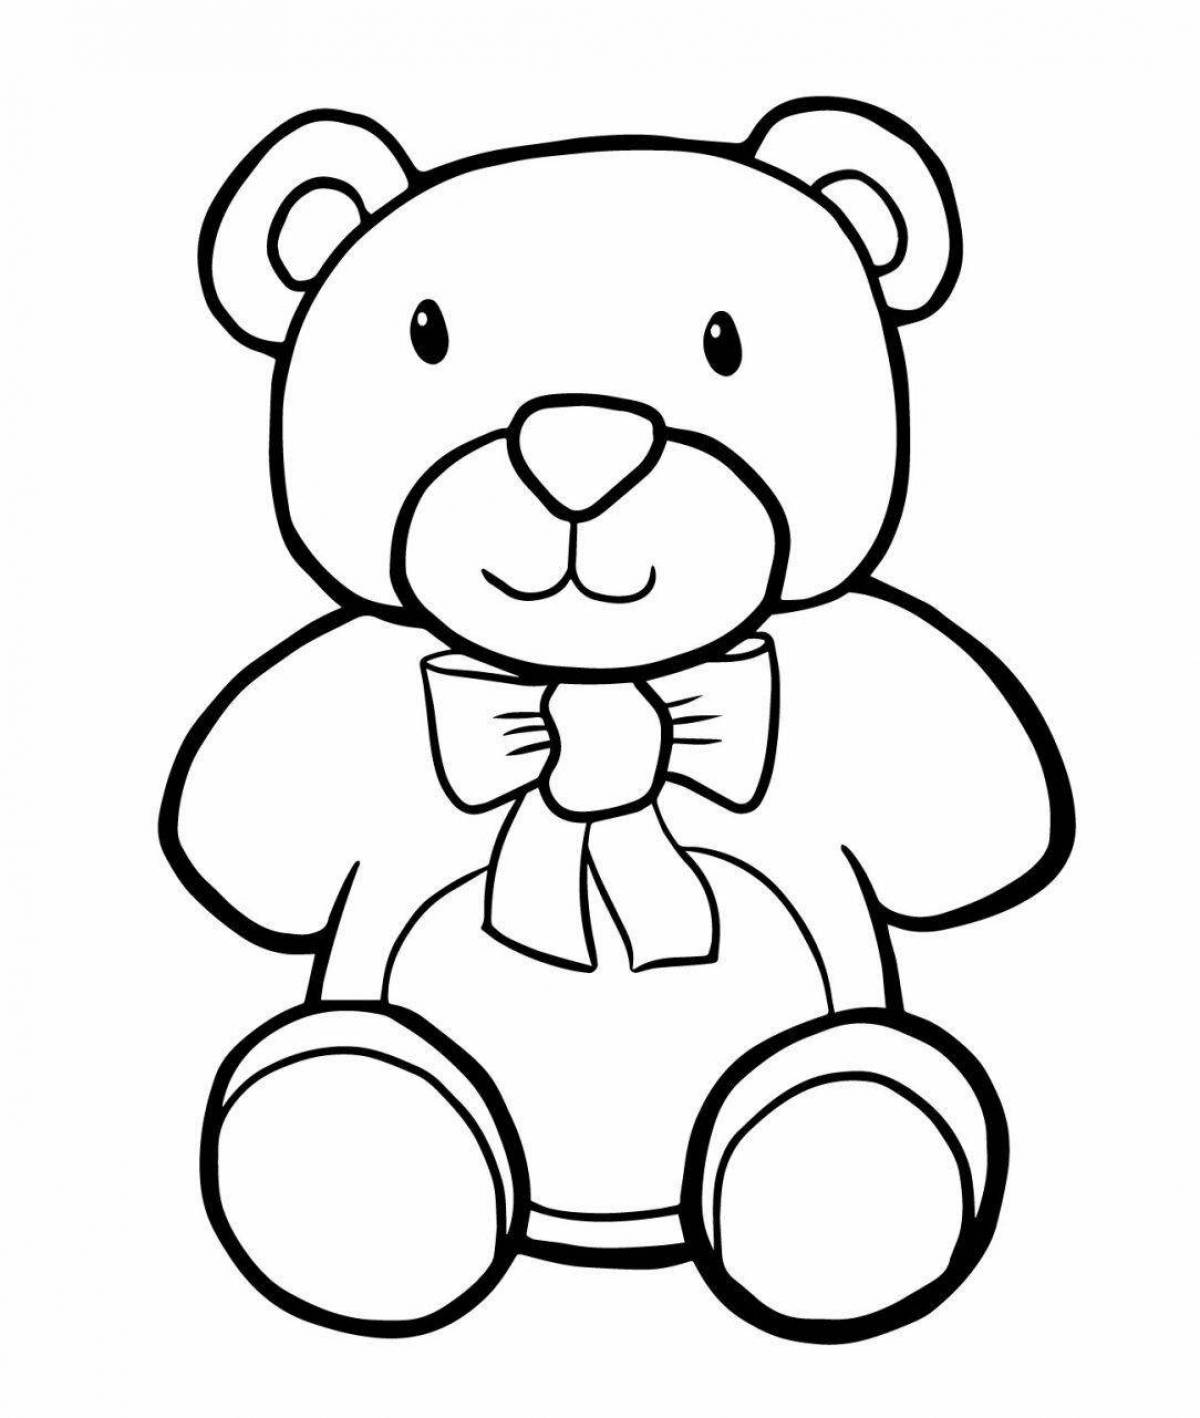 Charming teddy bear with a bow coloring